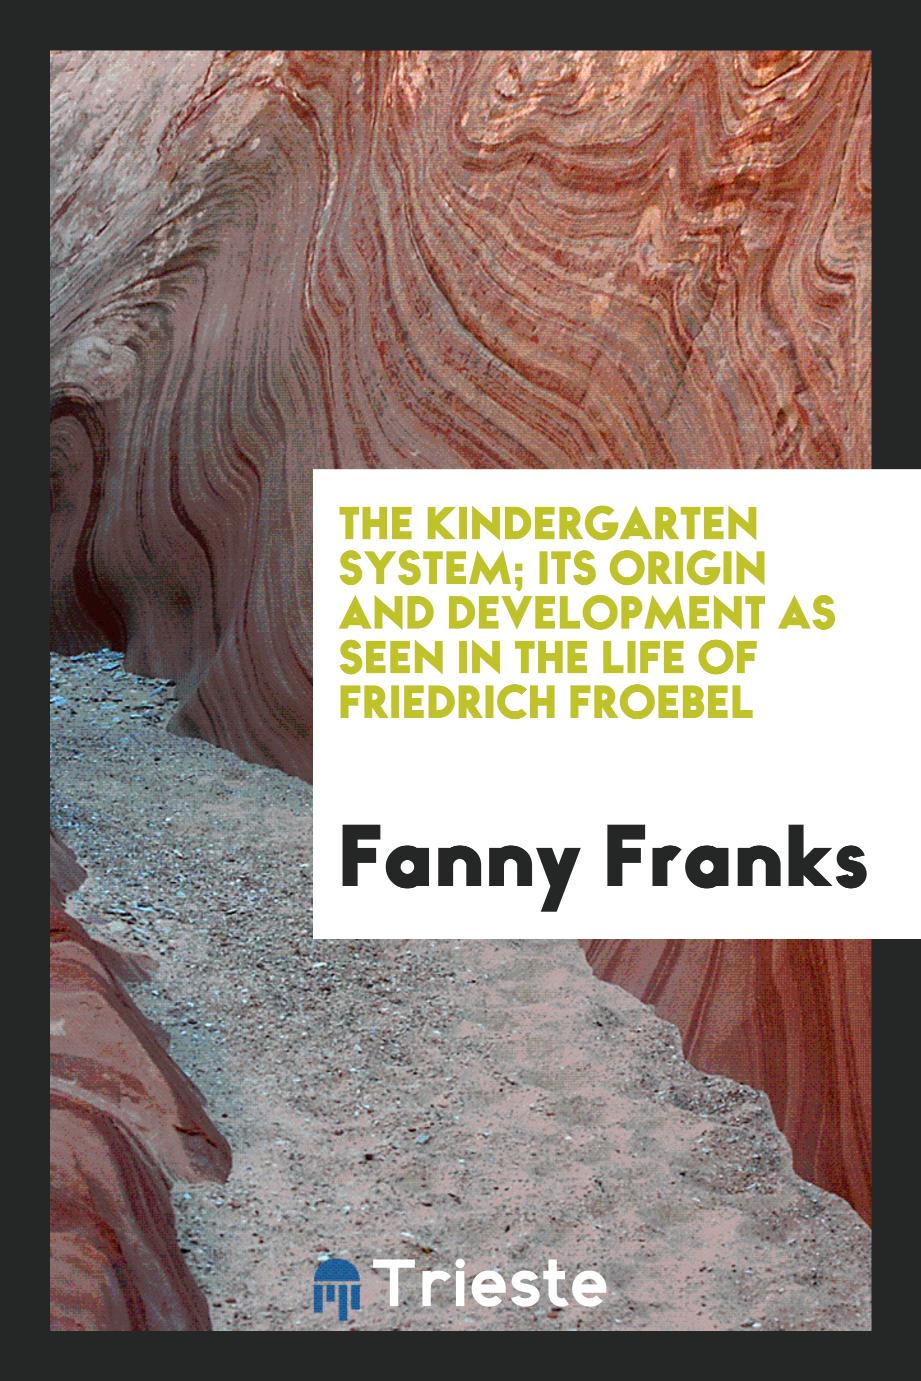 The kindergarten system; its origin and development as seen in the life of Friedrich Froebel